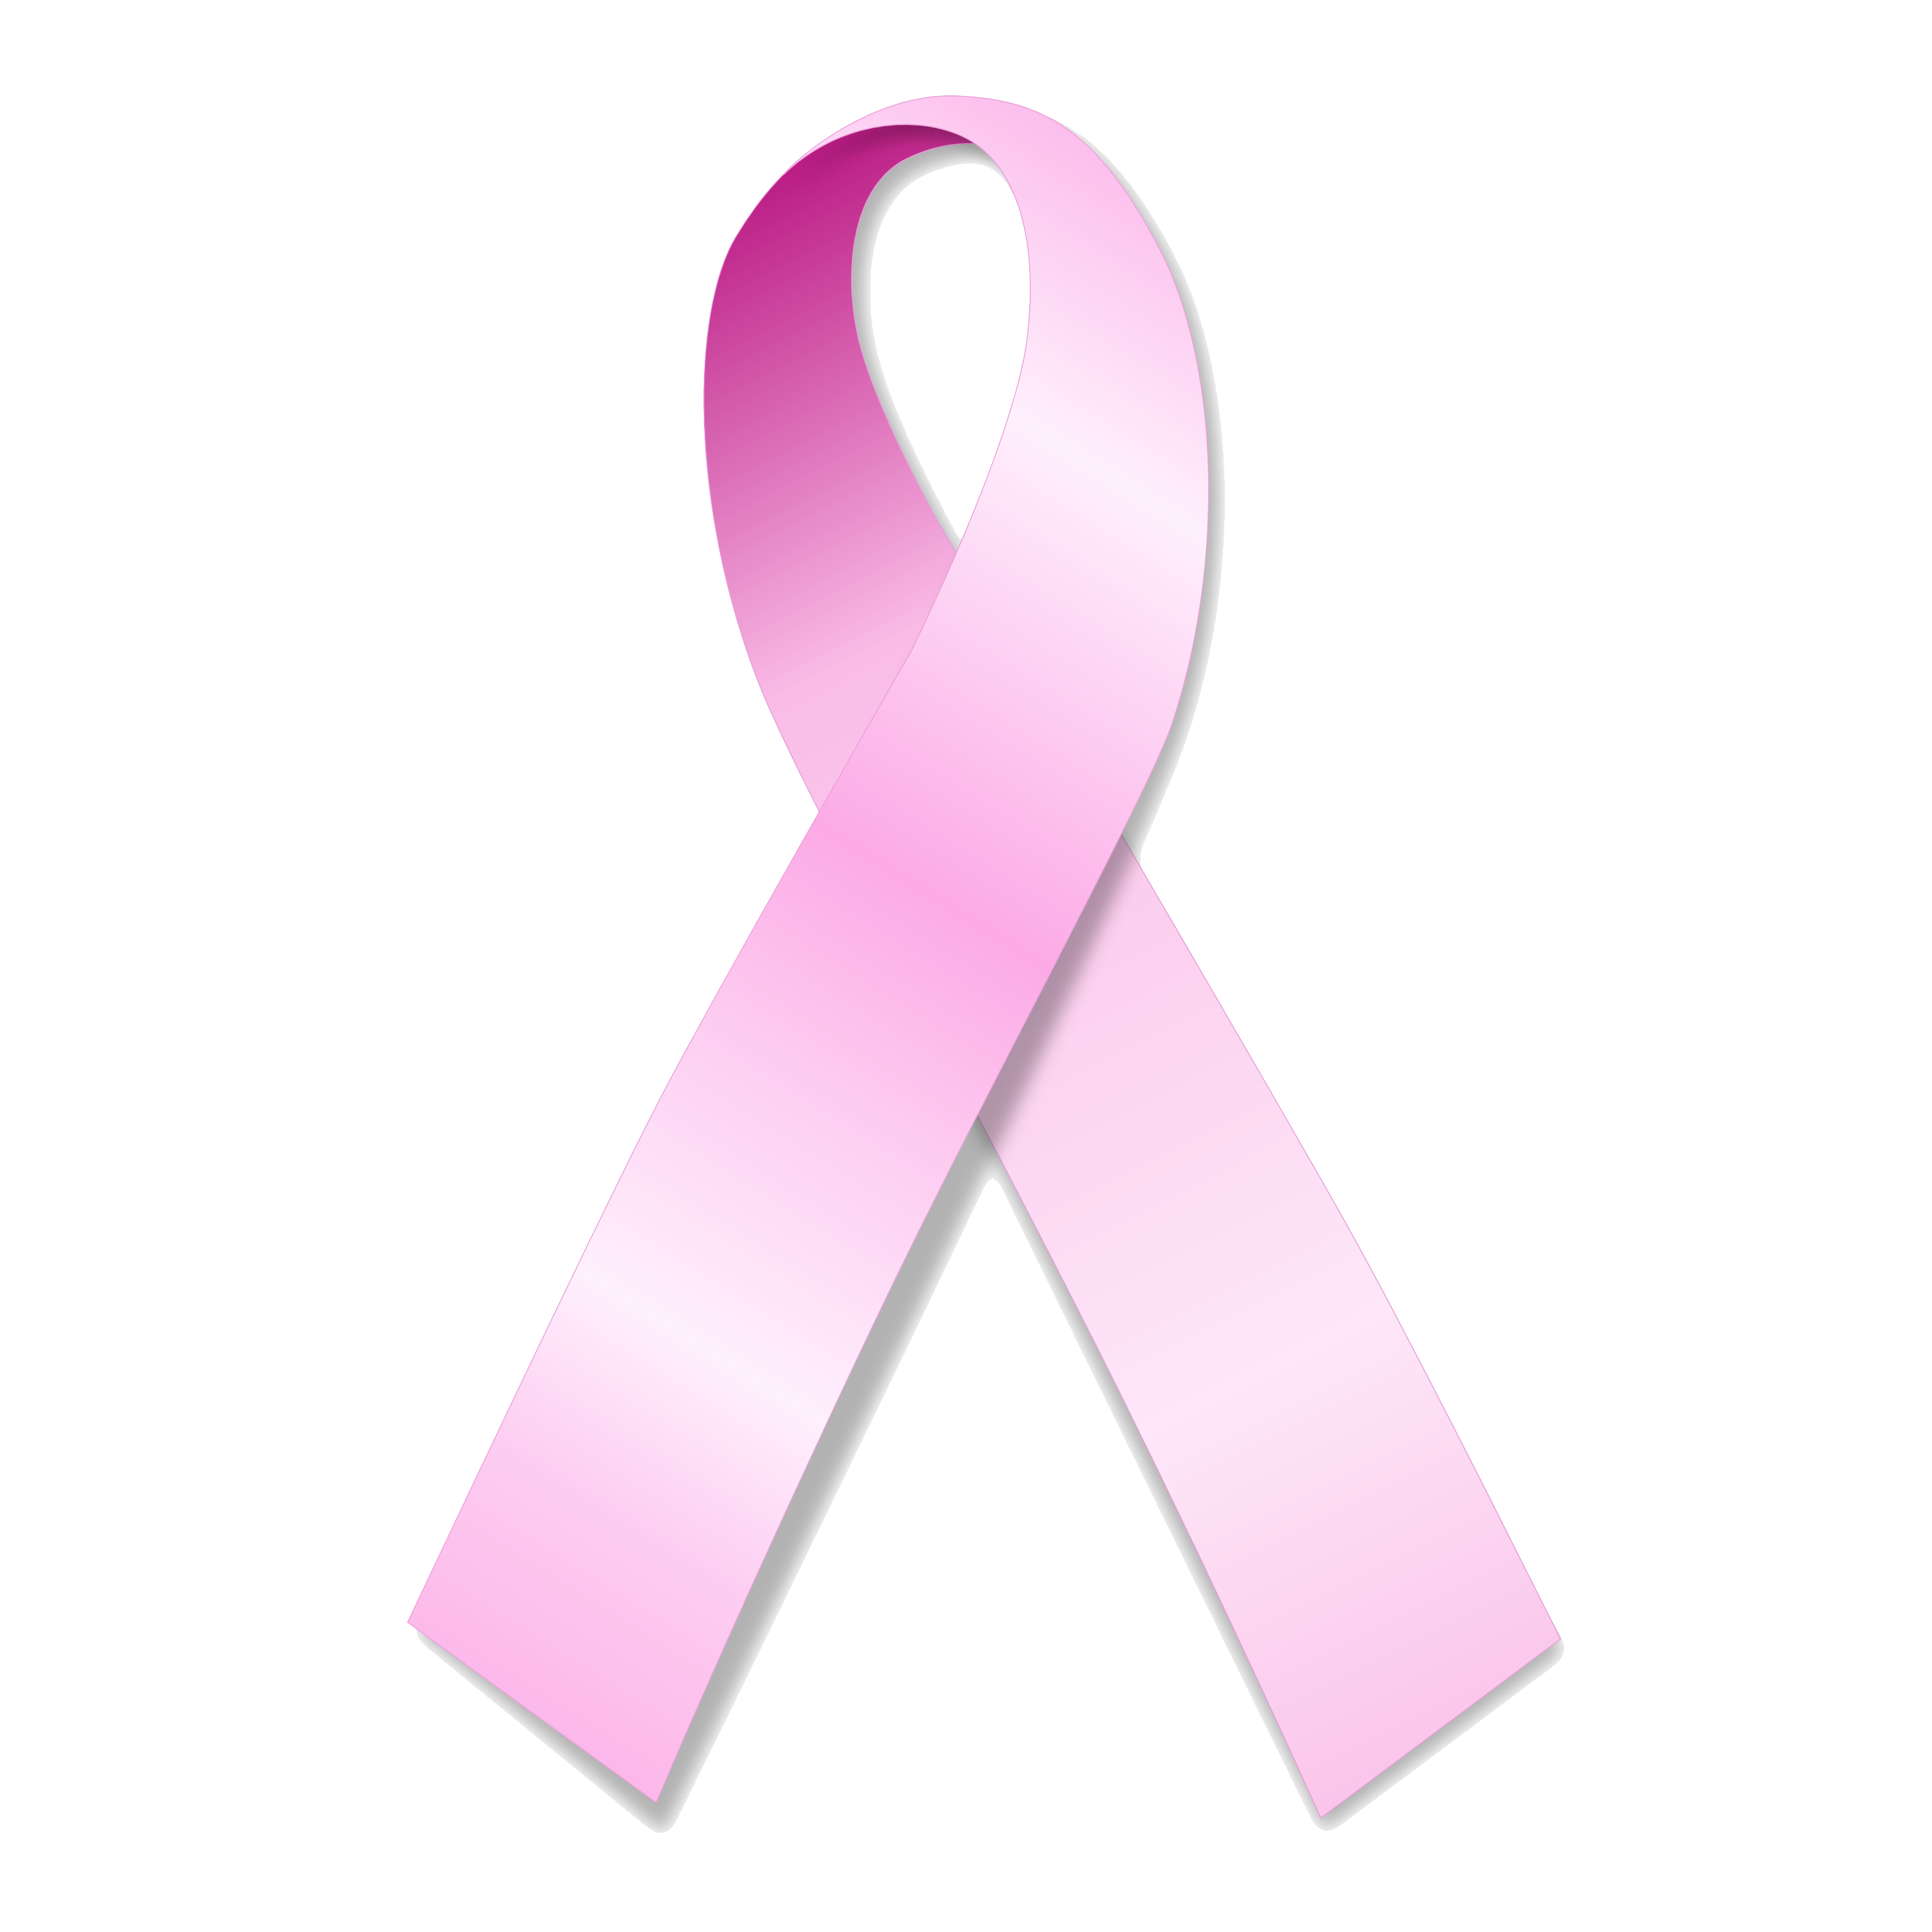 Breast Cancer Ribbon PNG Images